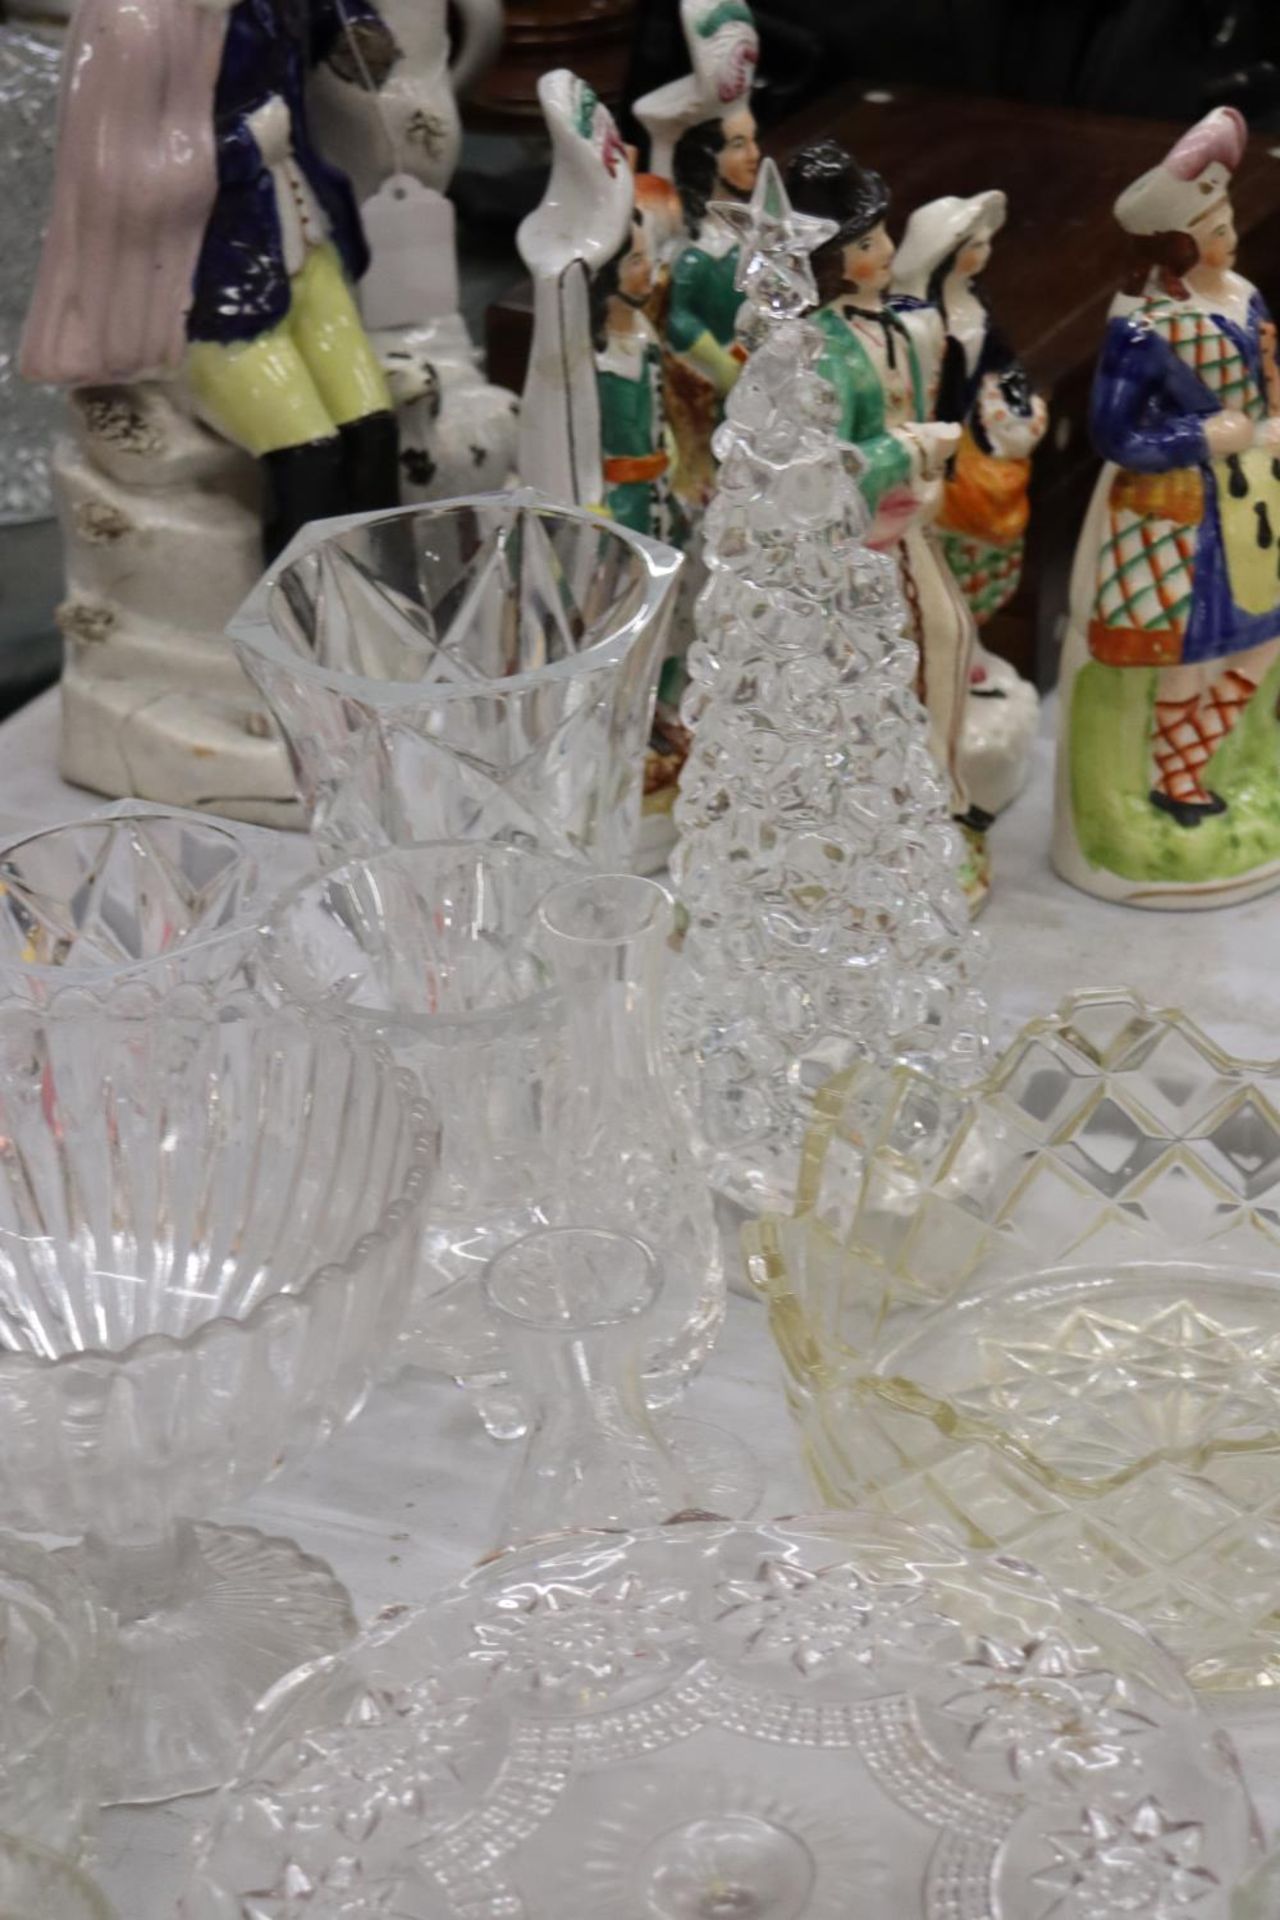 A LARGE QUANTITY OF GLASSWARE TO INCLUDE LARGE BOWLS, VASES, CANDLESTICKS, A GLOBE, ETC - Image 5 of 6